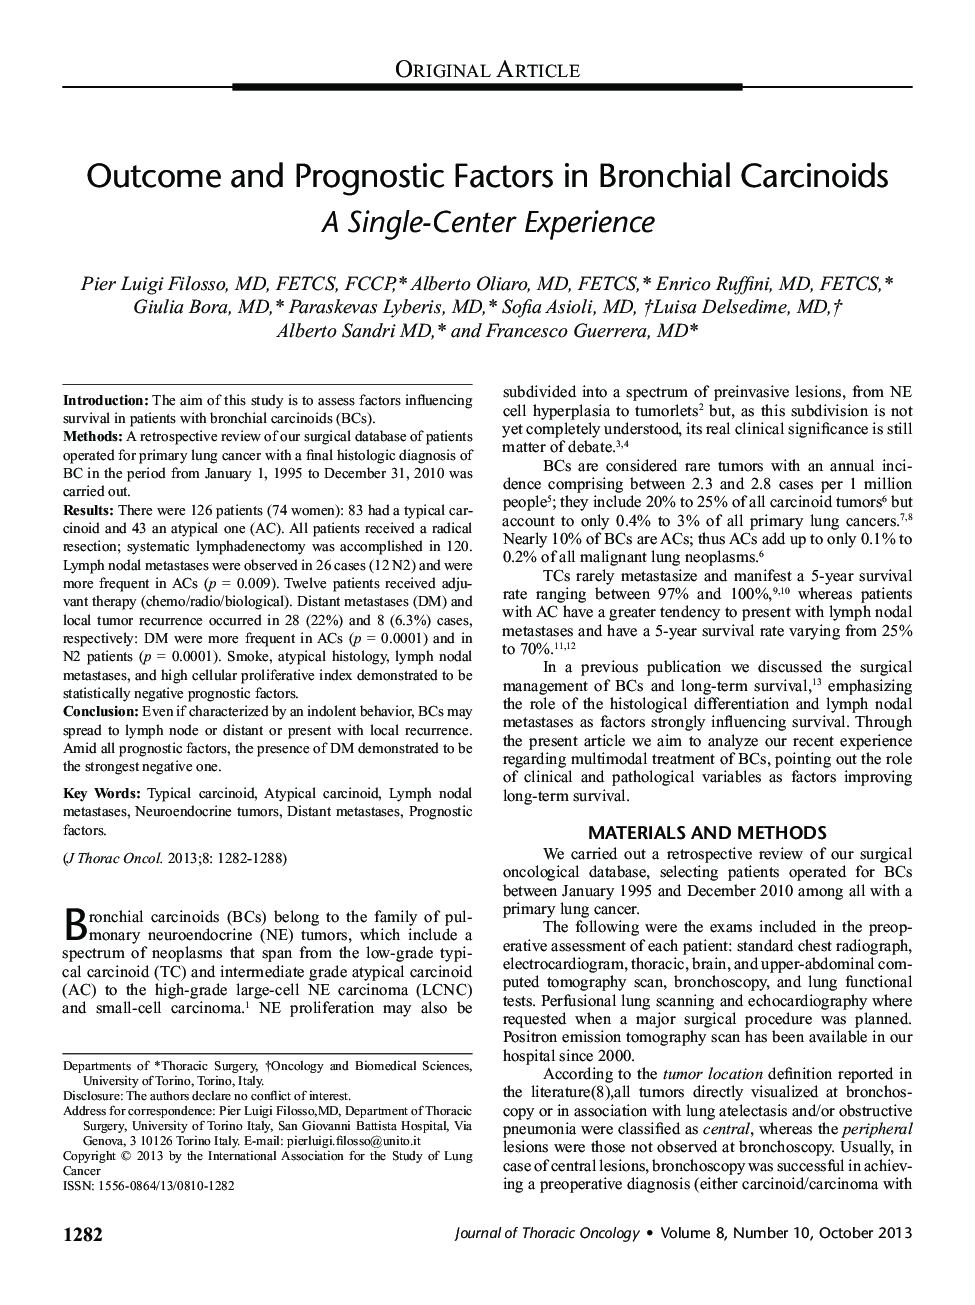 Outcome and Prognostic Factors in Bronchial Carcinoids: A Single-Center Experience 